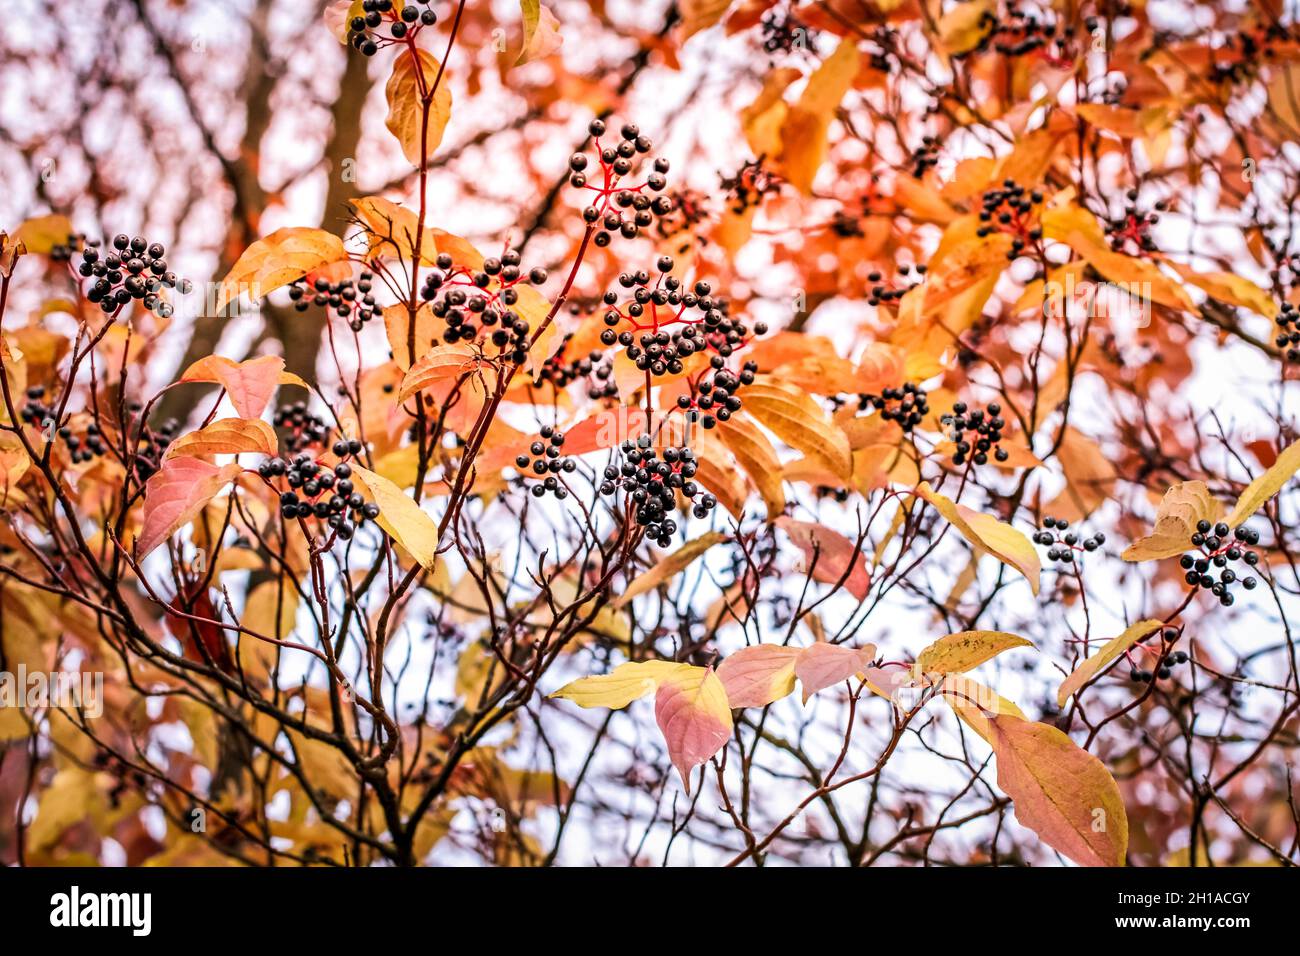 Autumn - Clusters of black berries and purple and brown leaves on the branches of decorative trees against a blue sky Stock Photo